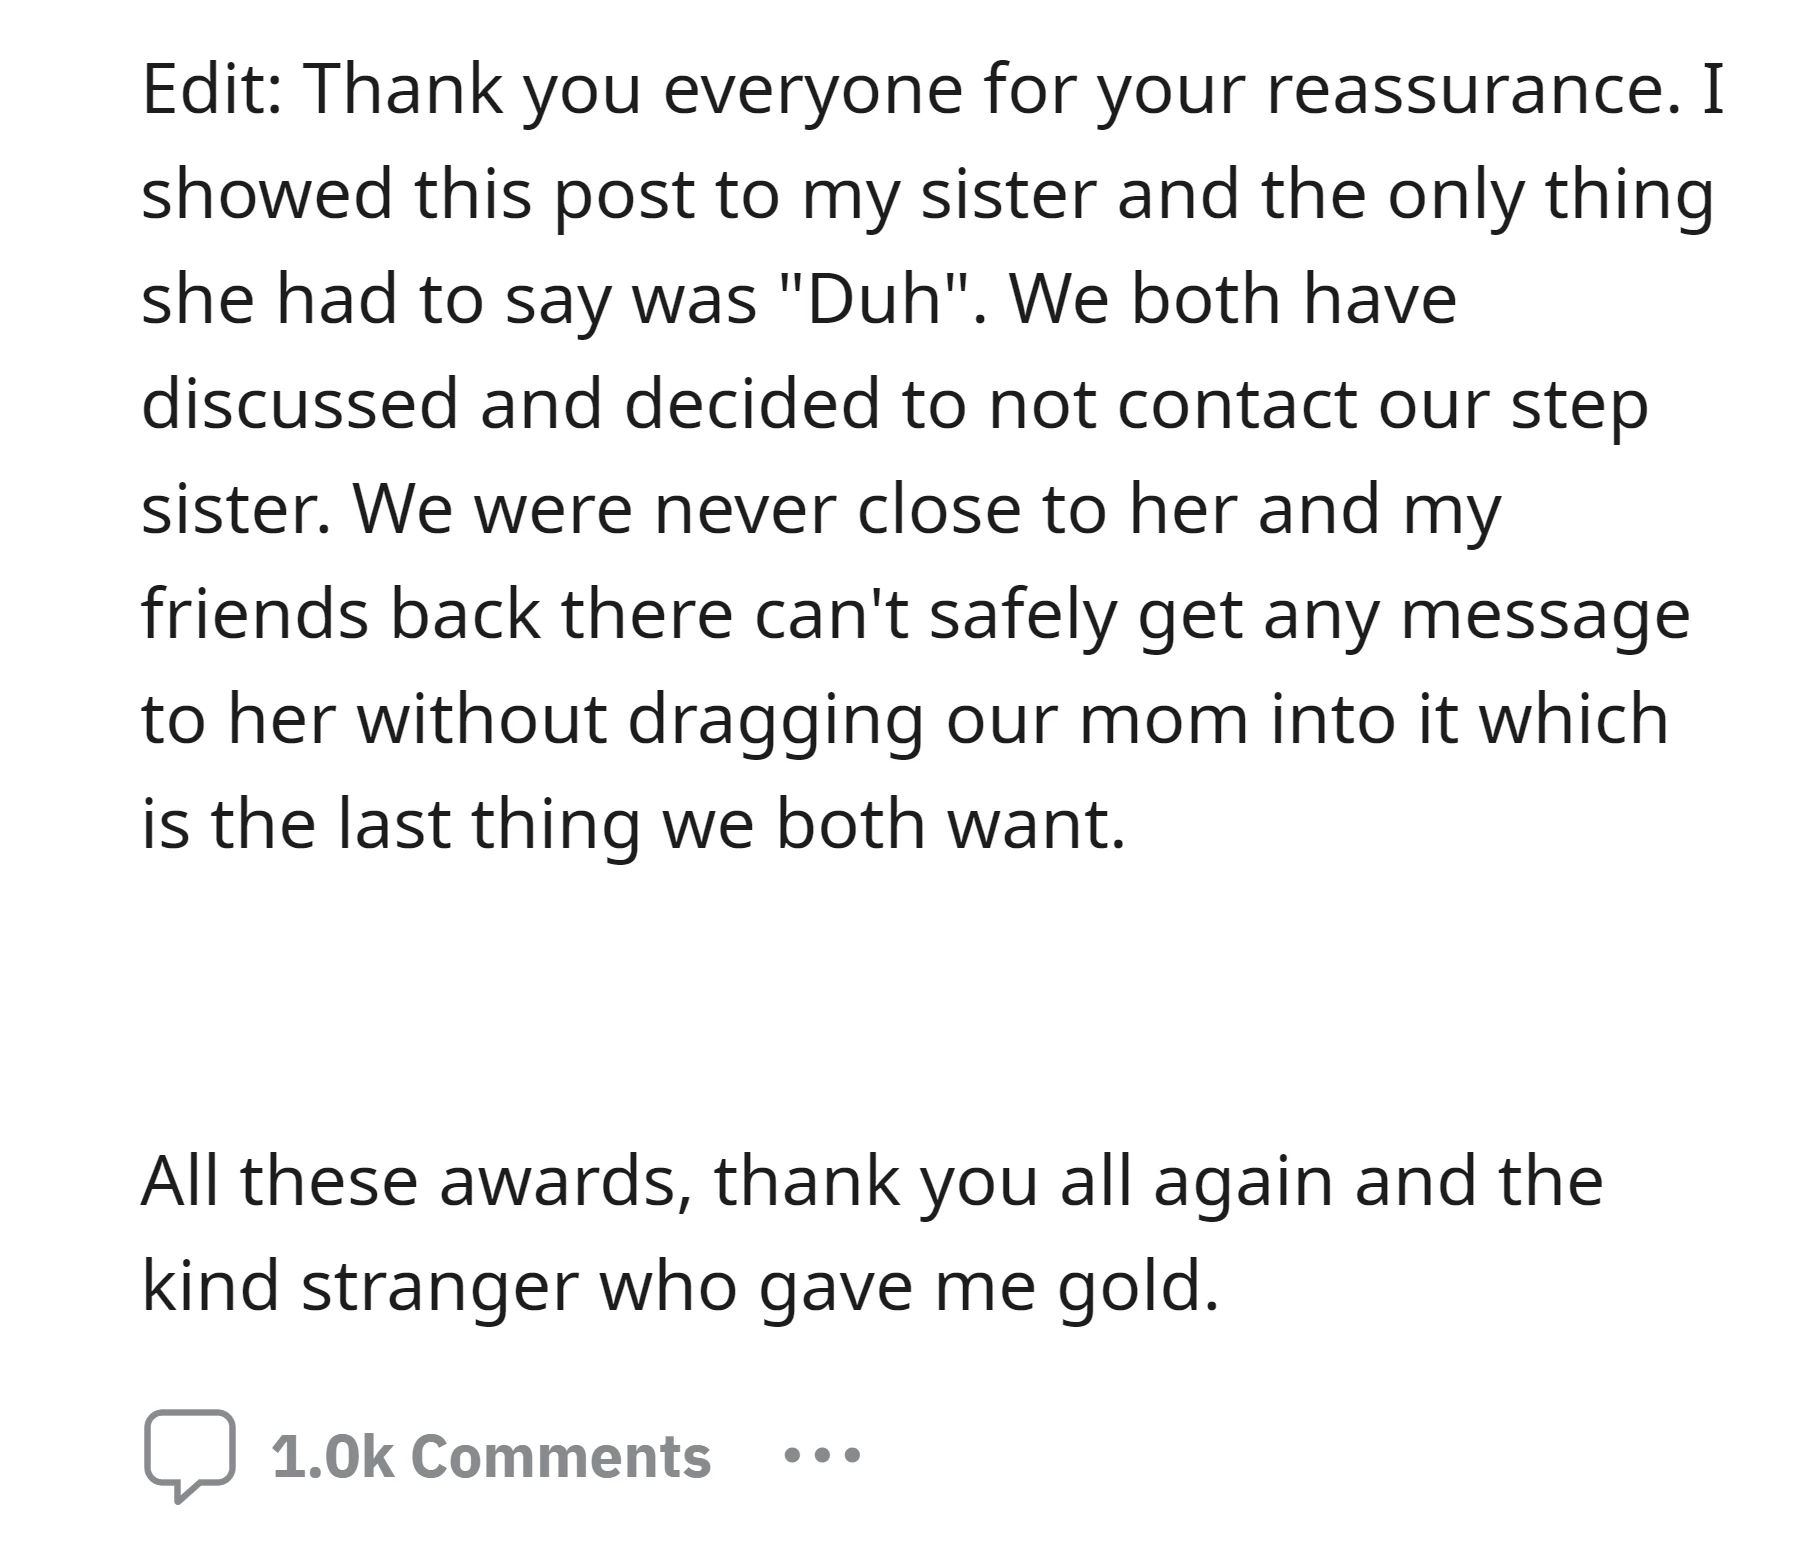 OP and her sister decided not to contact their stepsiste